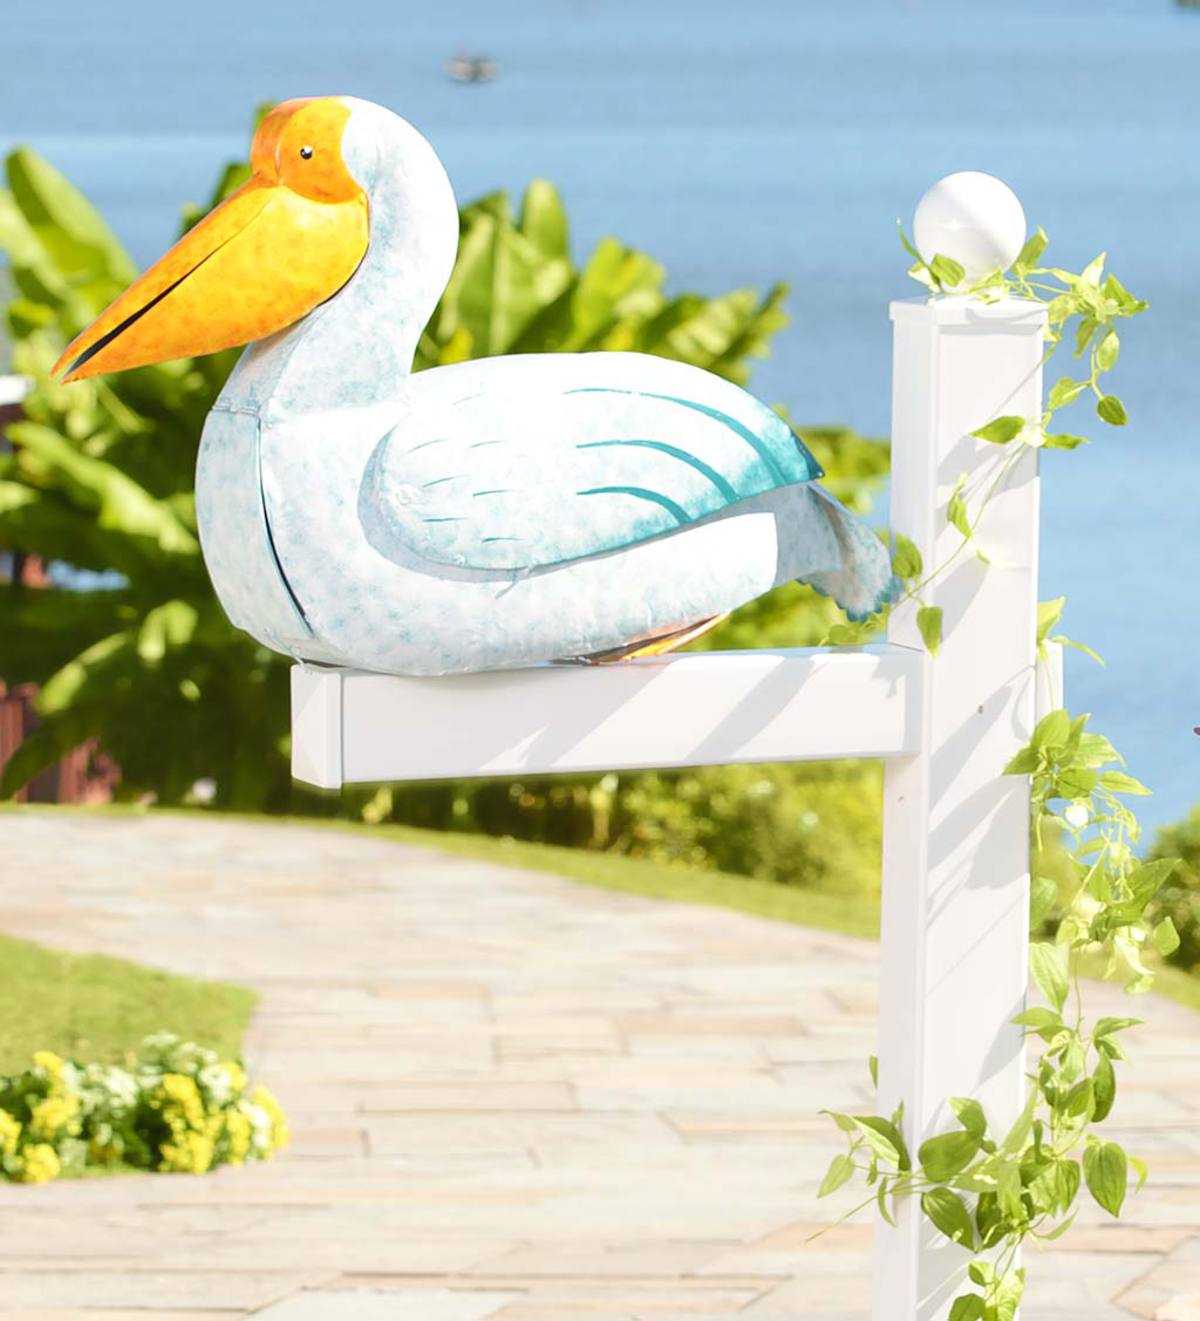 Lawn Decor WELCOME PIER POST - Fishing Duck or Pelican – Saving